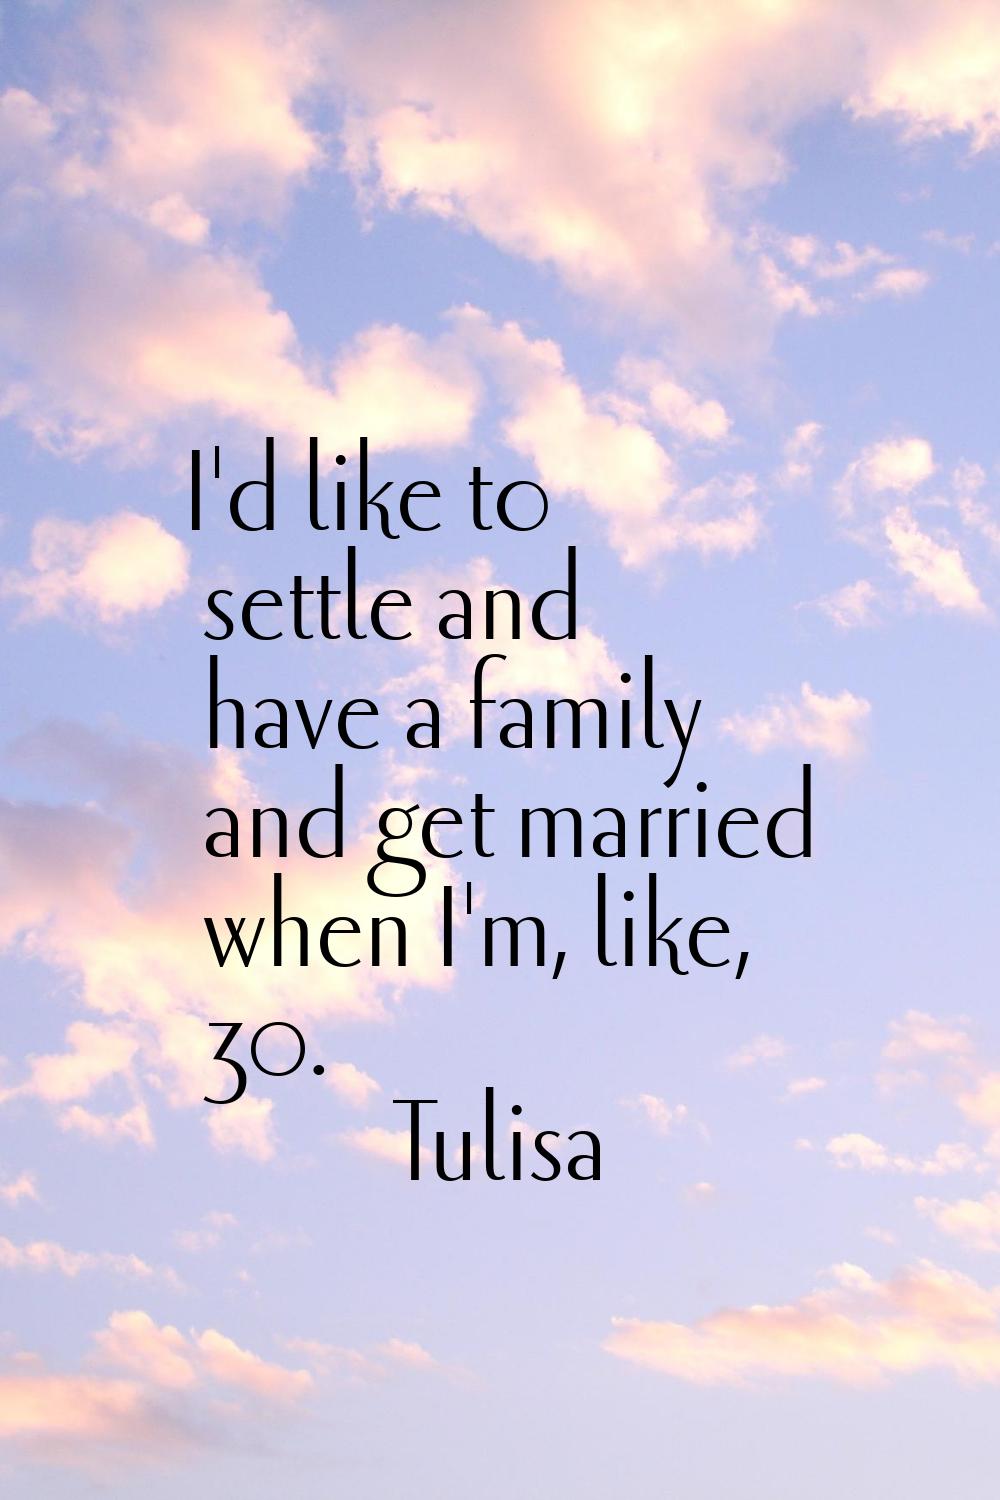 I'd like to settle and have a family and get married when I'm, like, 30.